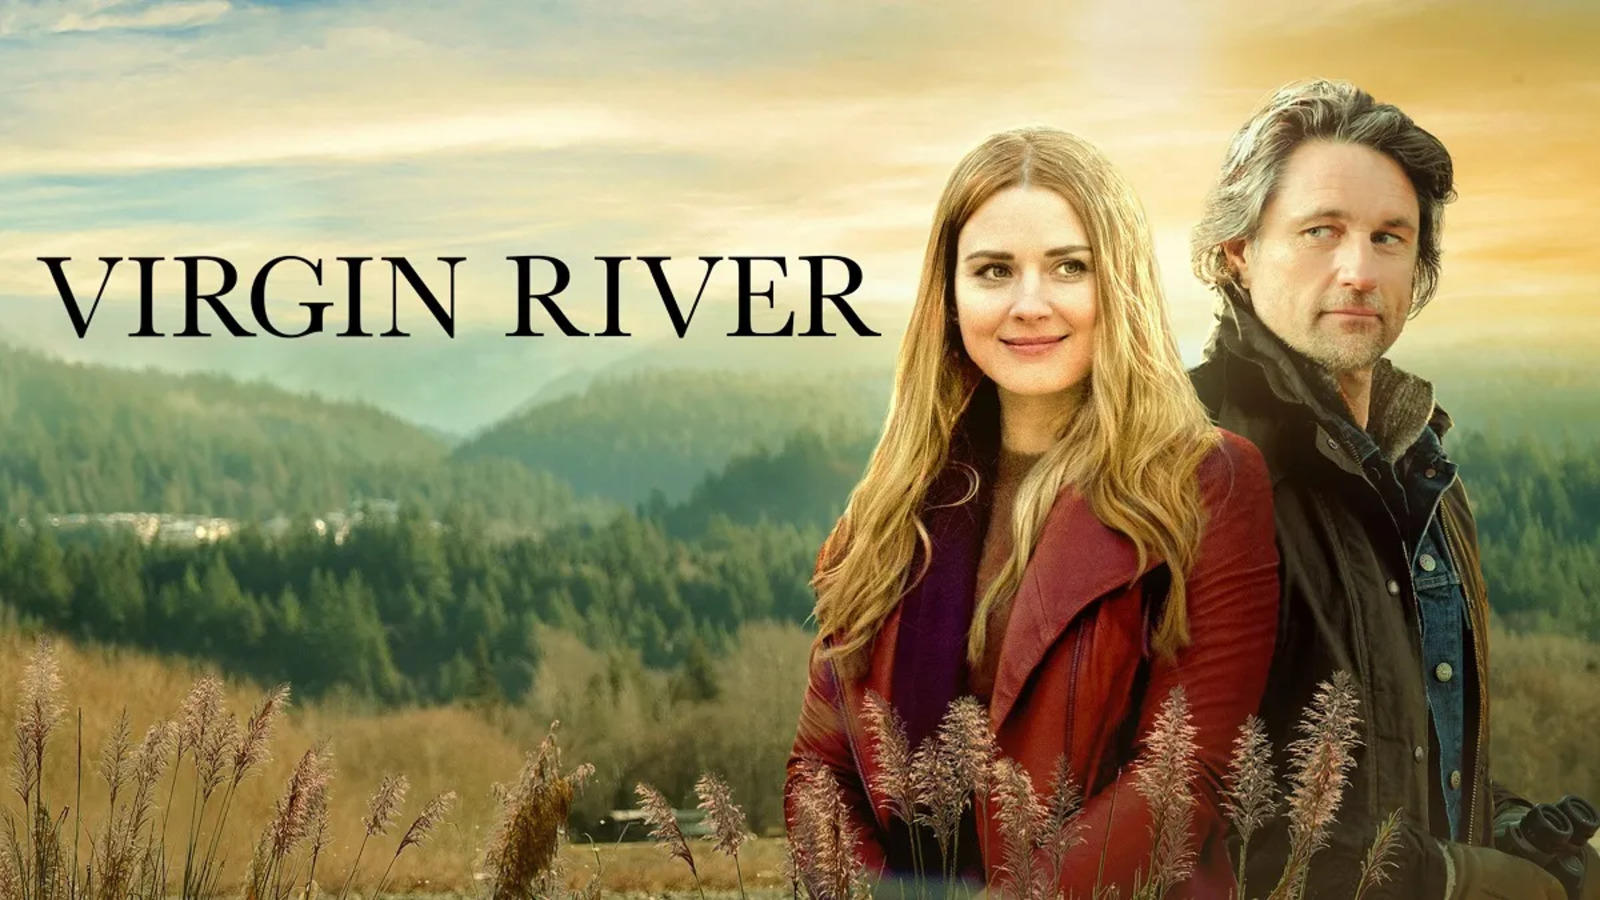 New Updates on Virgin River What's Next in Season 6